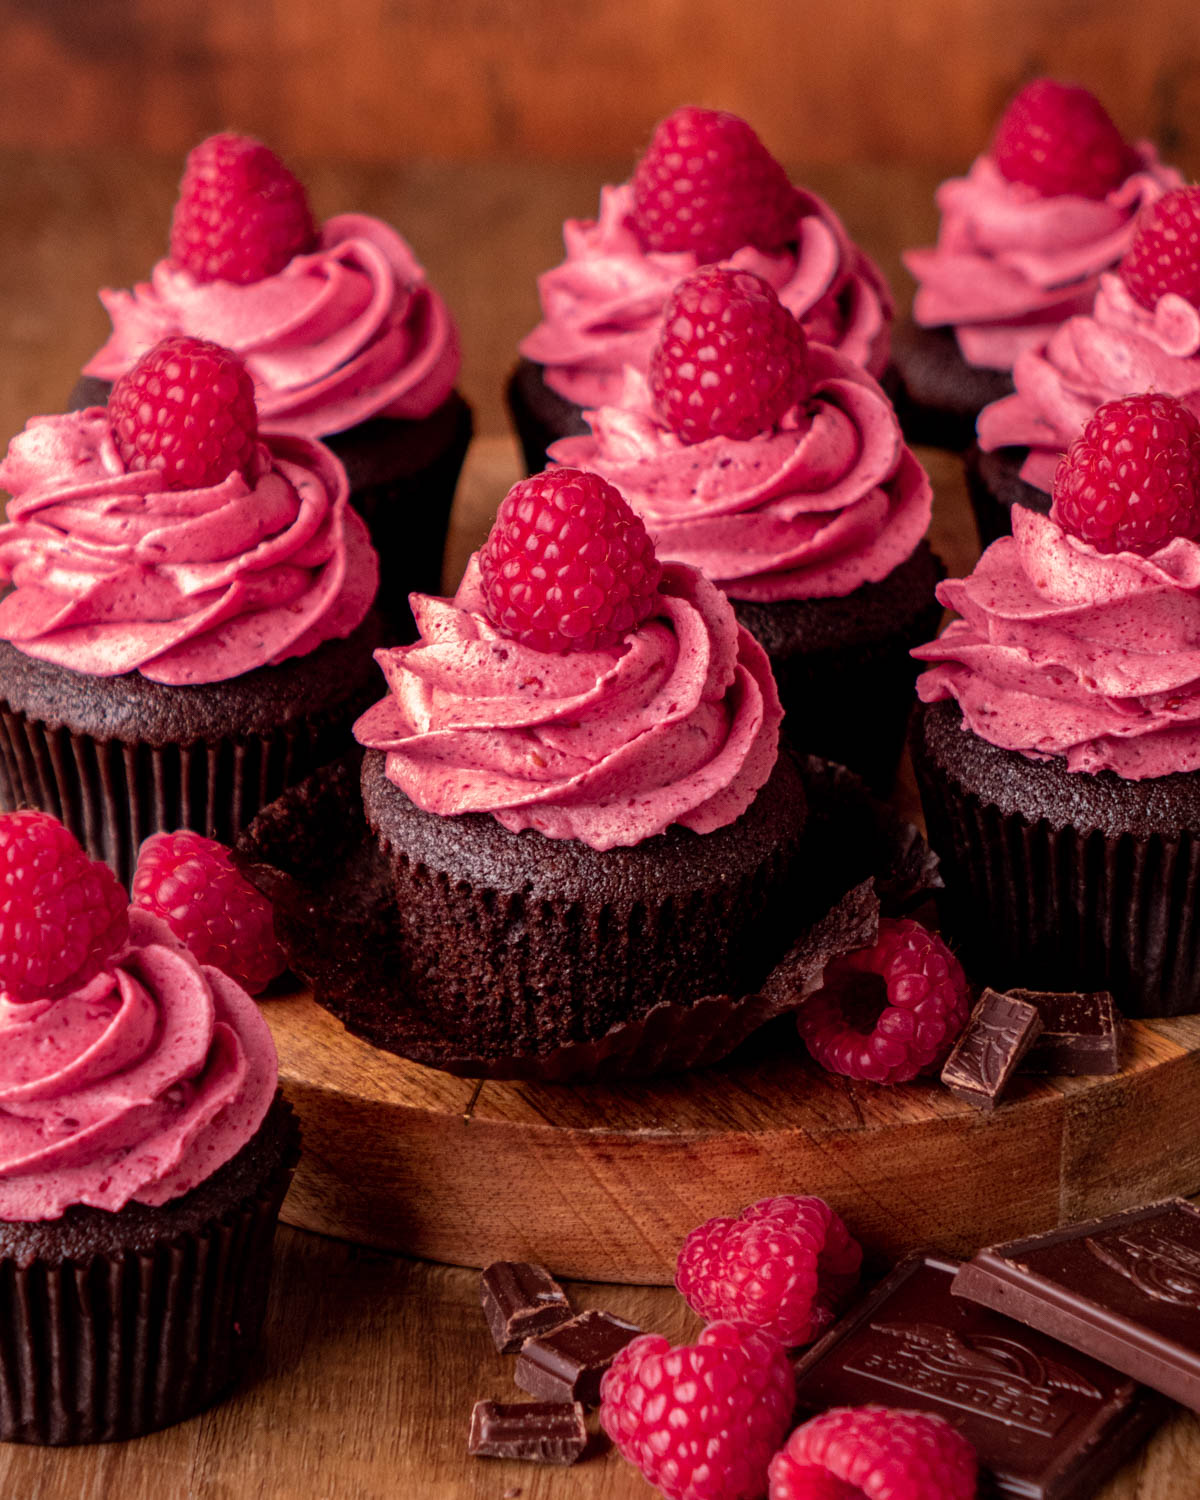 chocolate raspberry cupcakes on a wood platter with raspberries and chocolate around, the center cupcake with the wrapper taken off